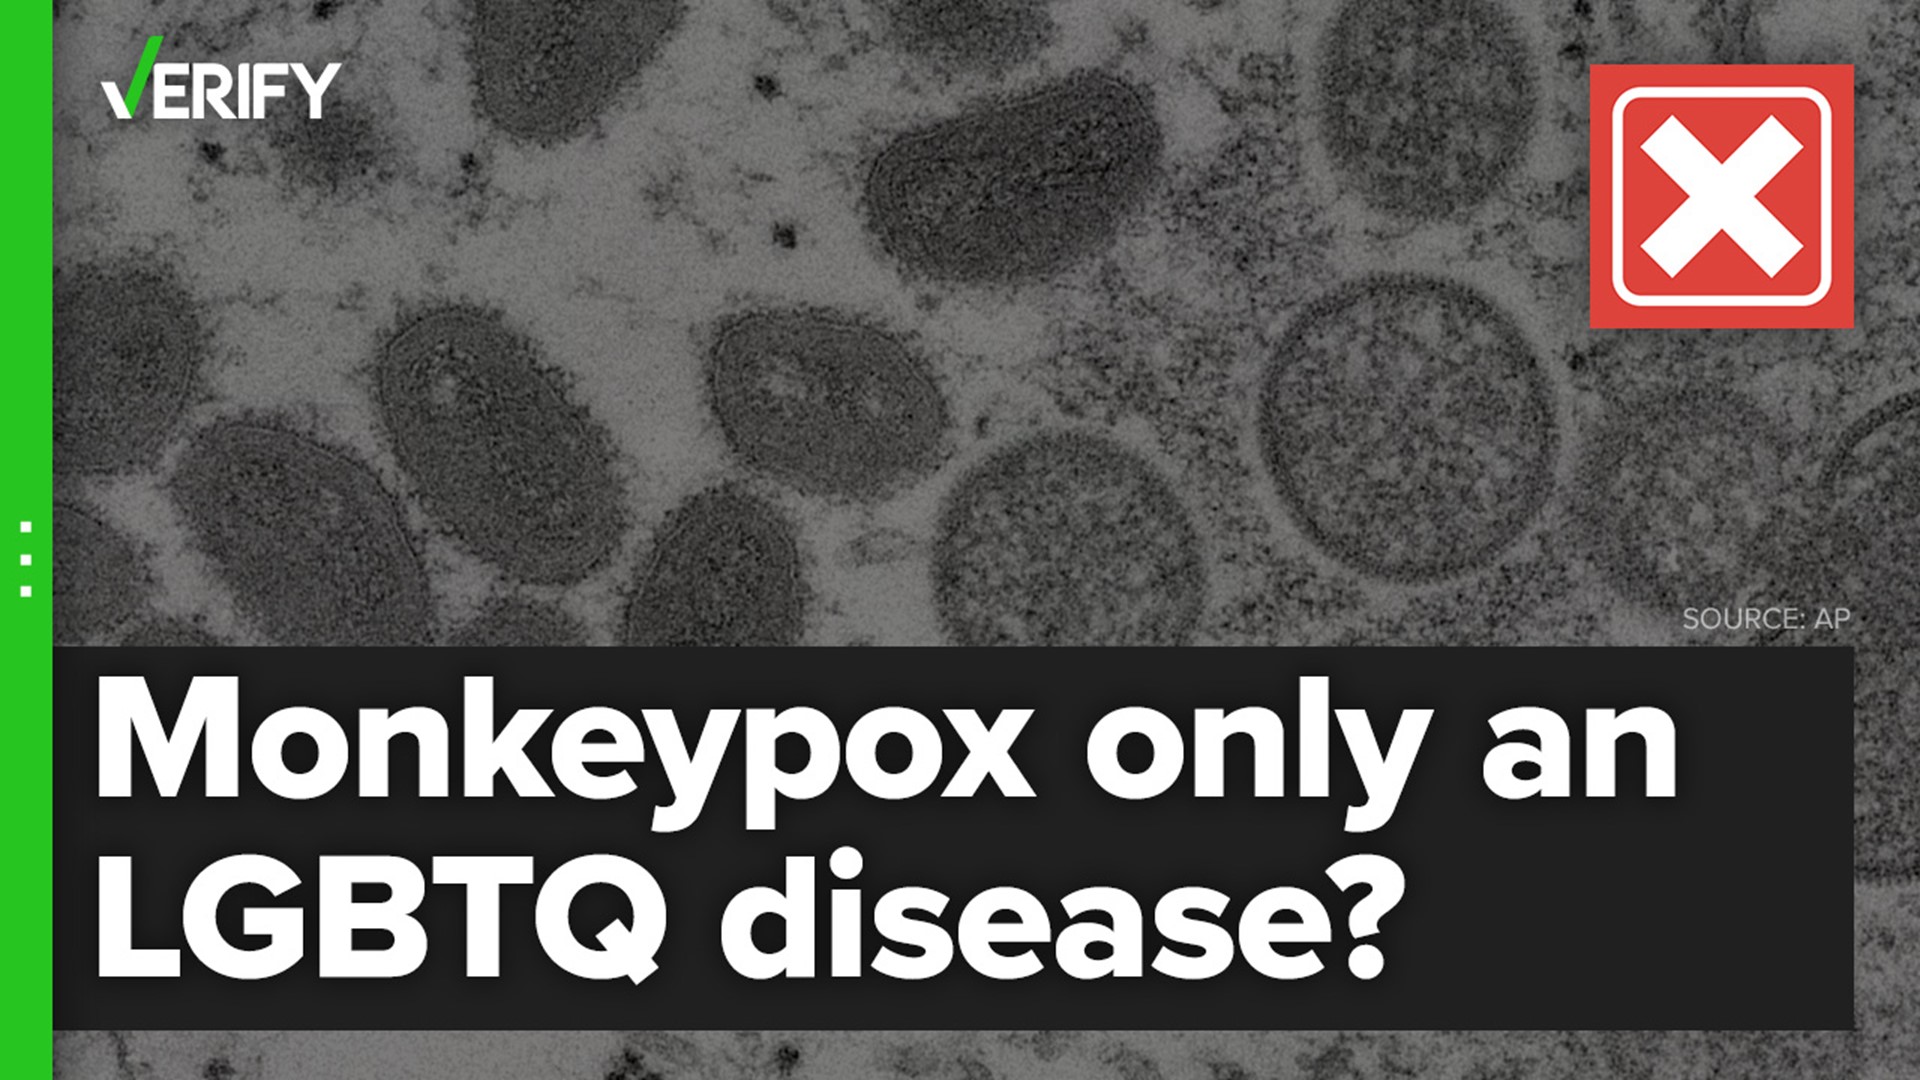 Some people on social media have falsely claimed monkeypox is a disease that is exclusive to LGBTQ people. Anyone can contract it through close contact.